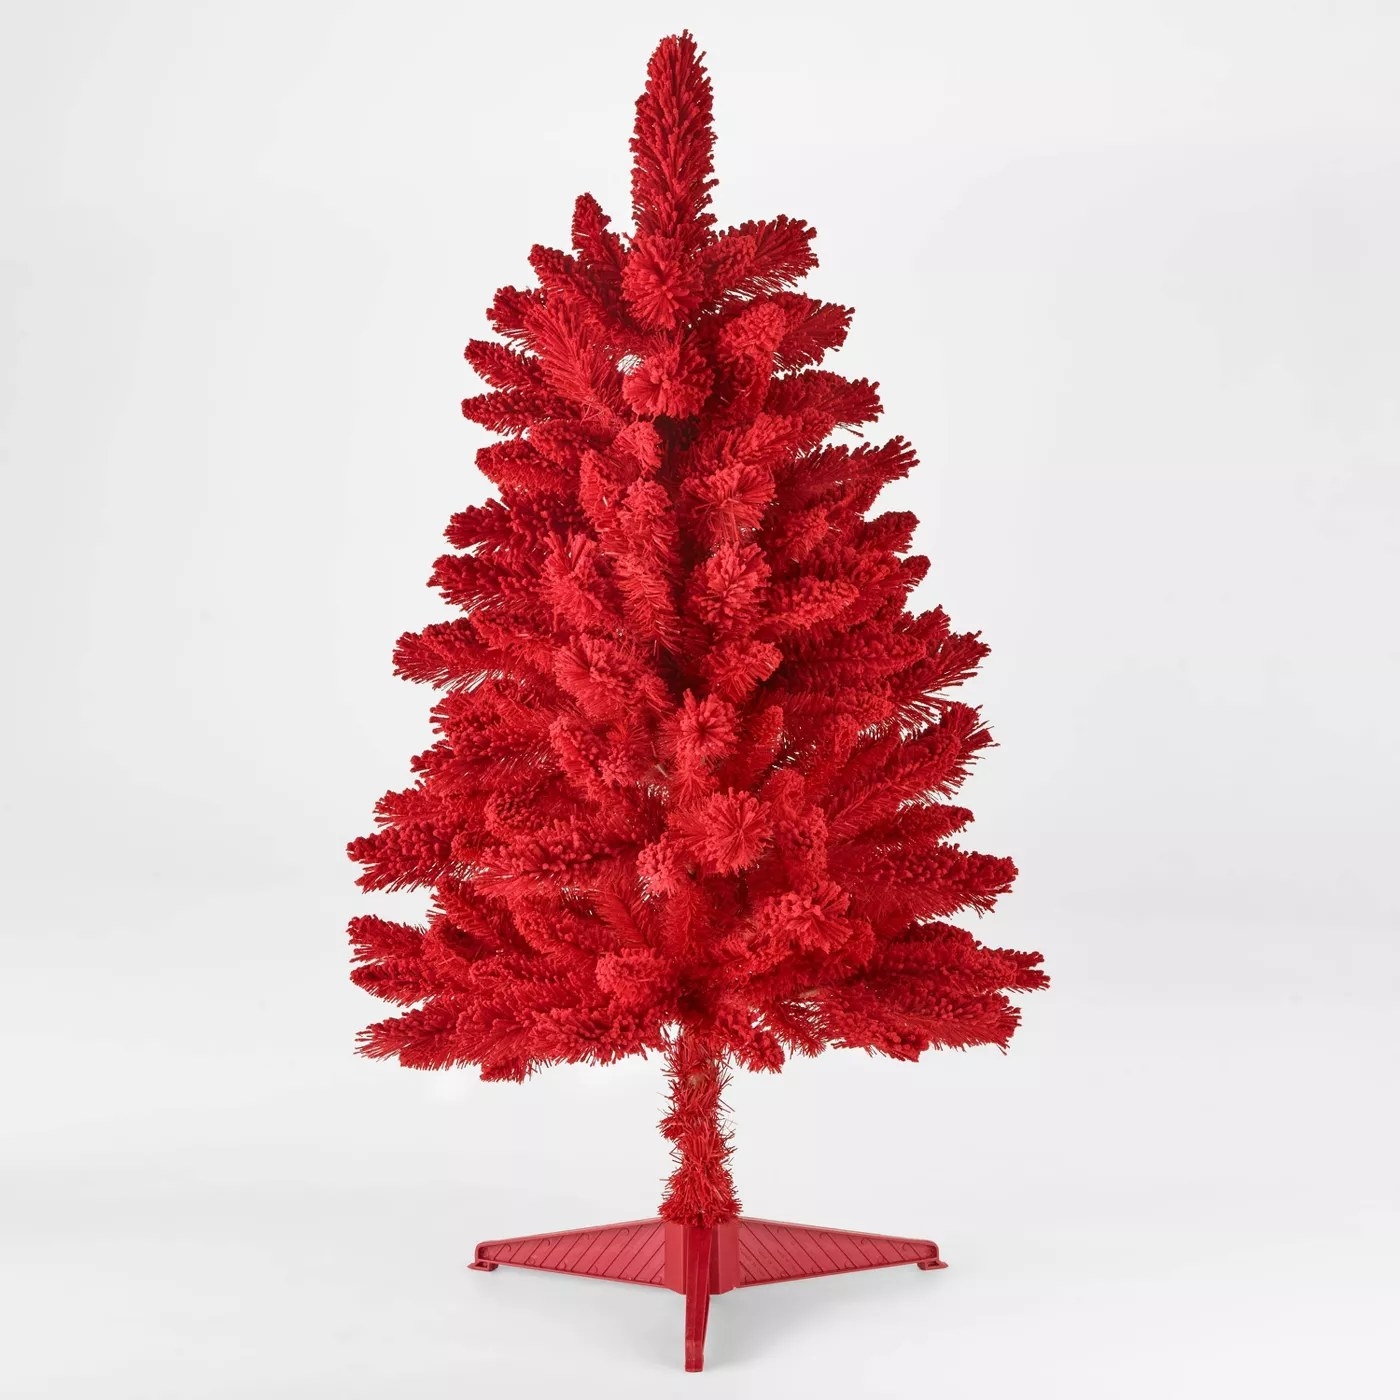 The red Christmas tree